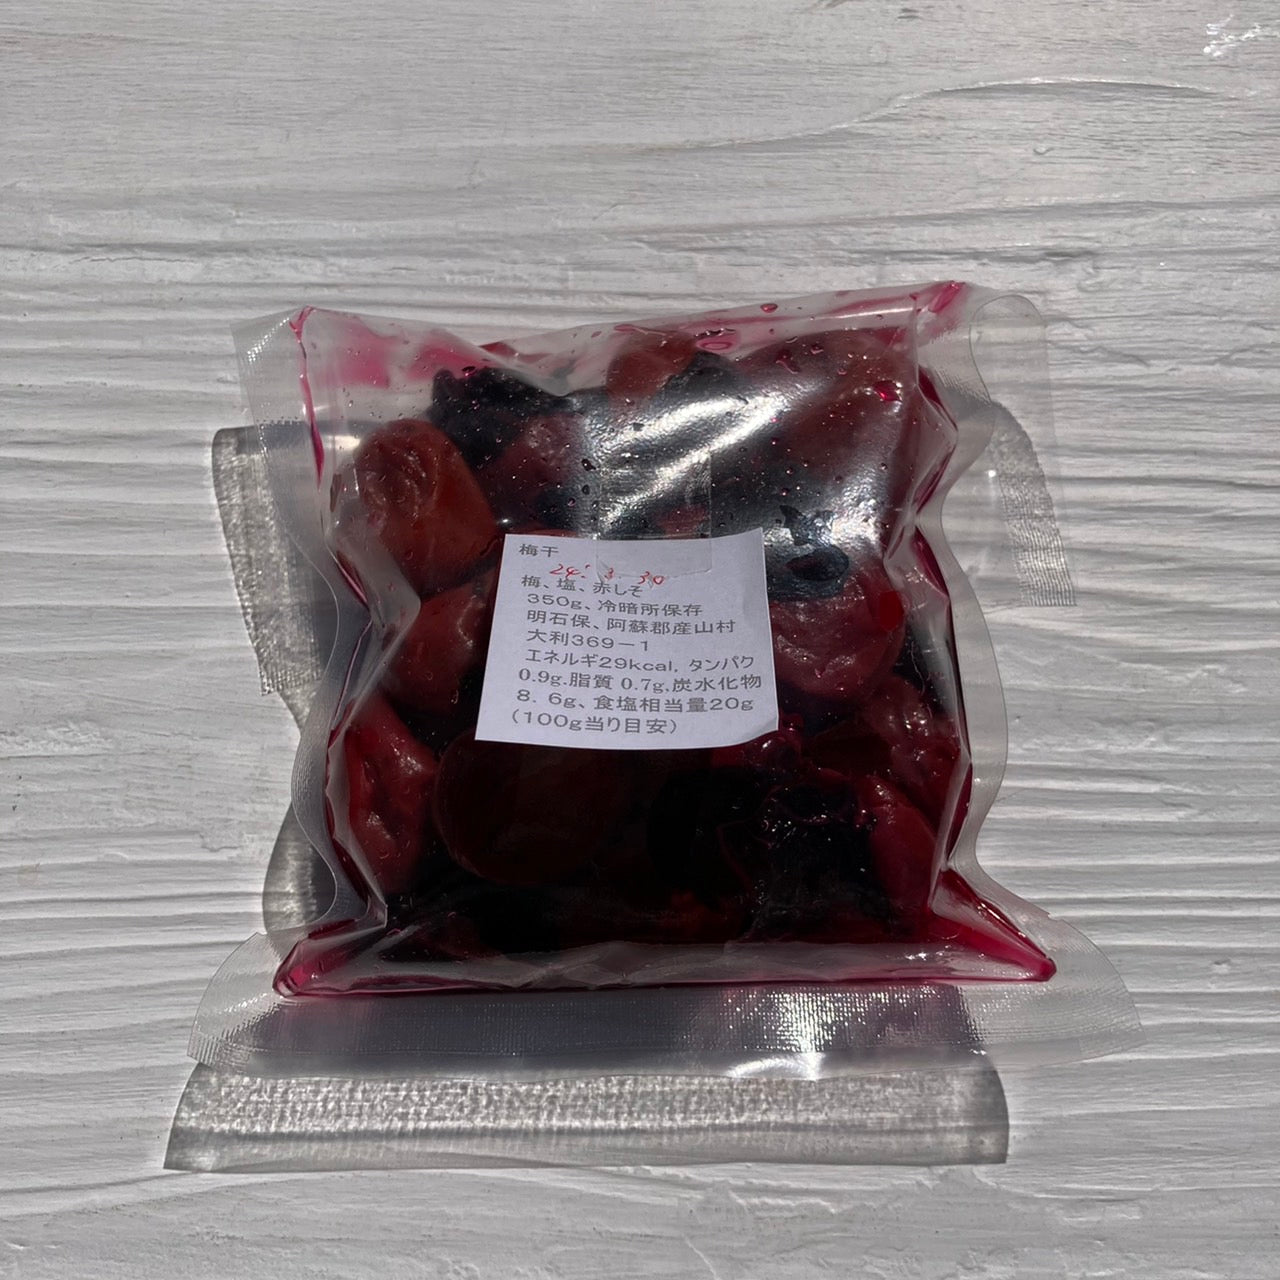 ※Back in stock! Akashi's handmade small pickled plums